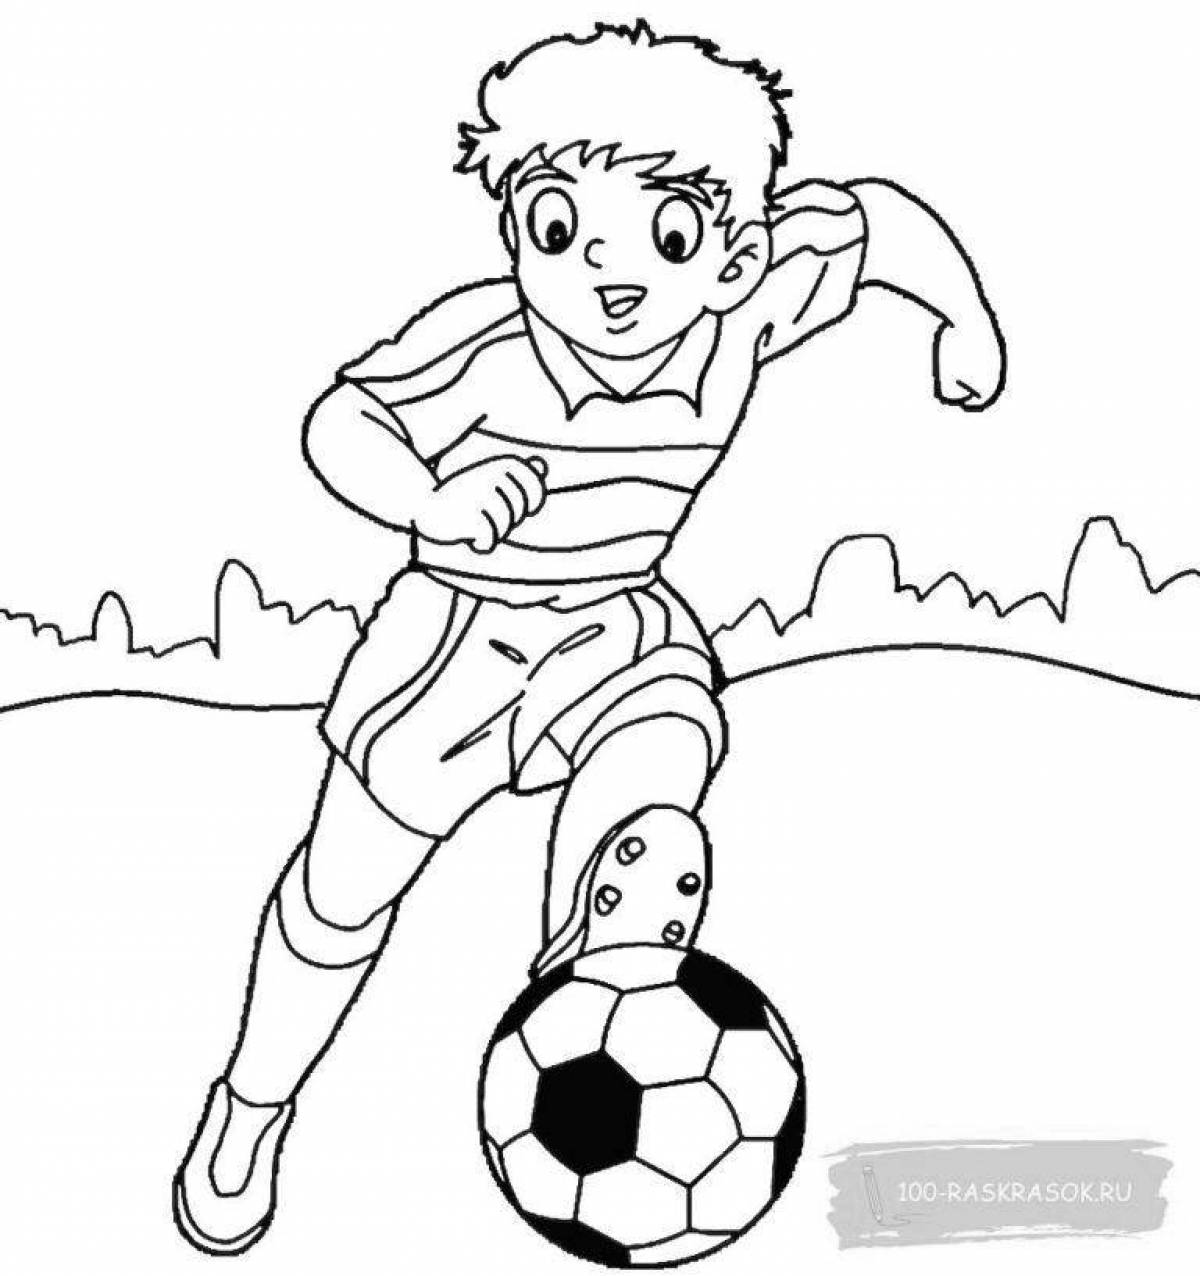 Live football coloring book for kids